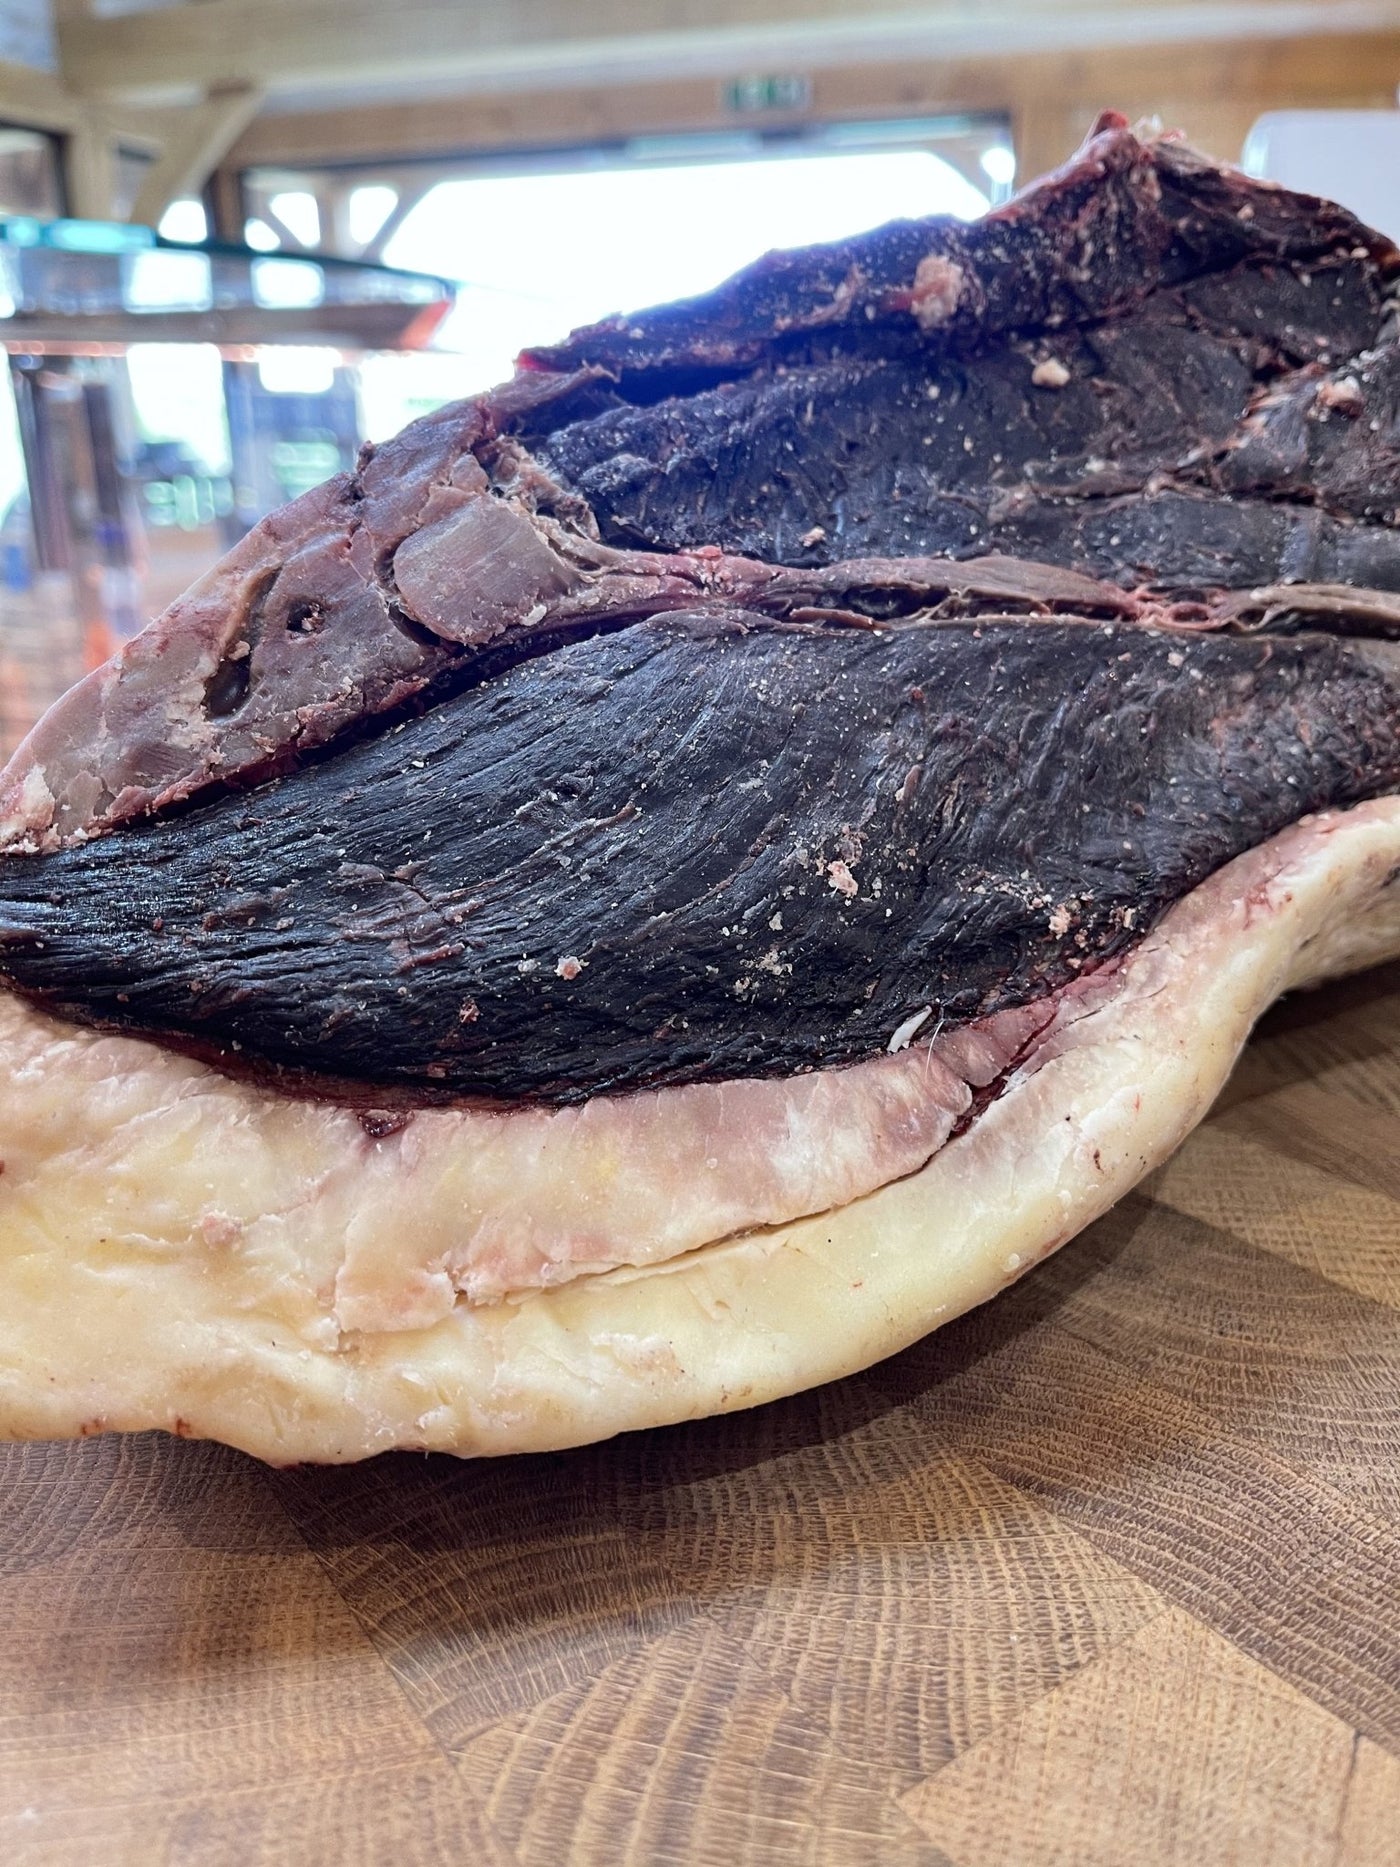 60 Day Dry-Aged Ex Dairy Swedish Red and White Rump - Thomas Joseph Butchery - Ethical Dry-Aged Meat The Best Steak UK Thomas Joseph Butchery